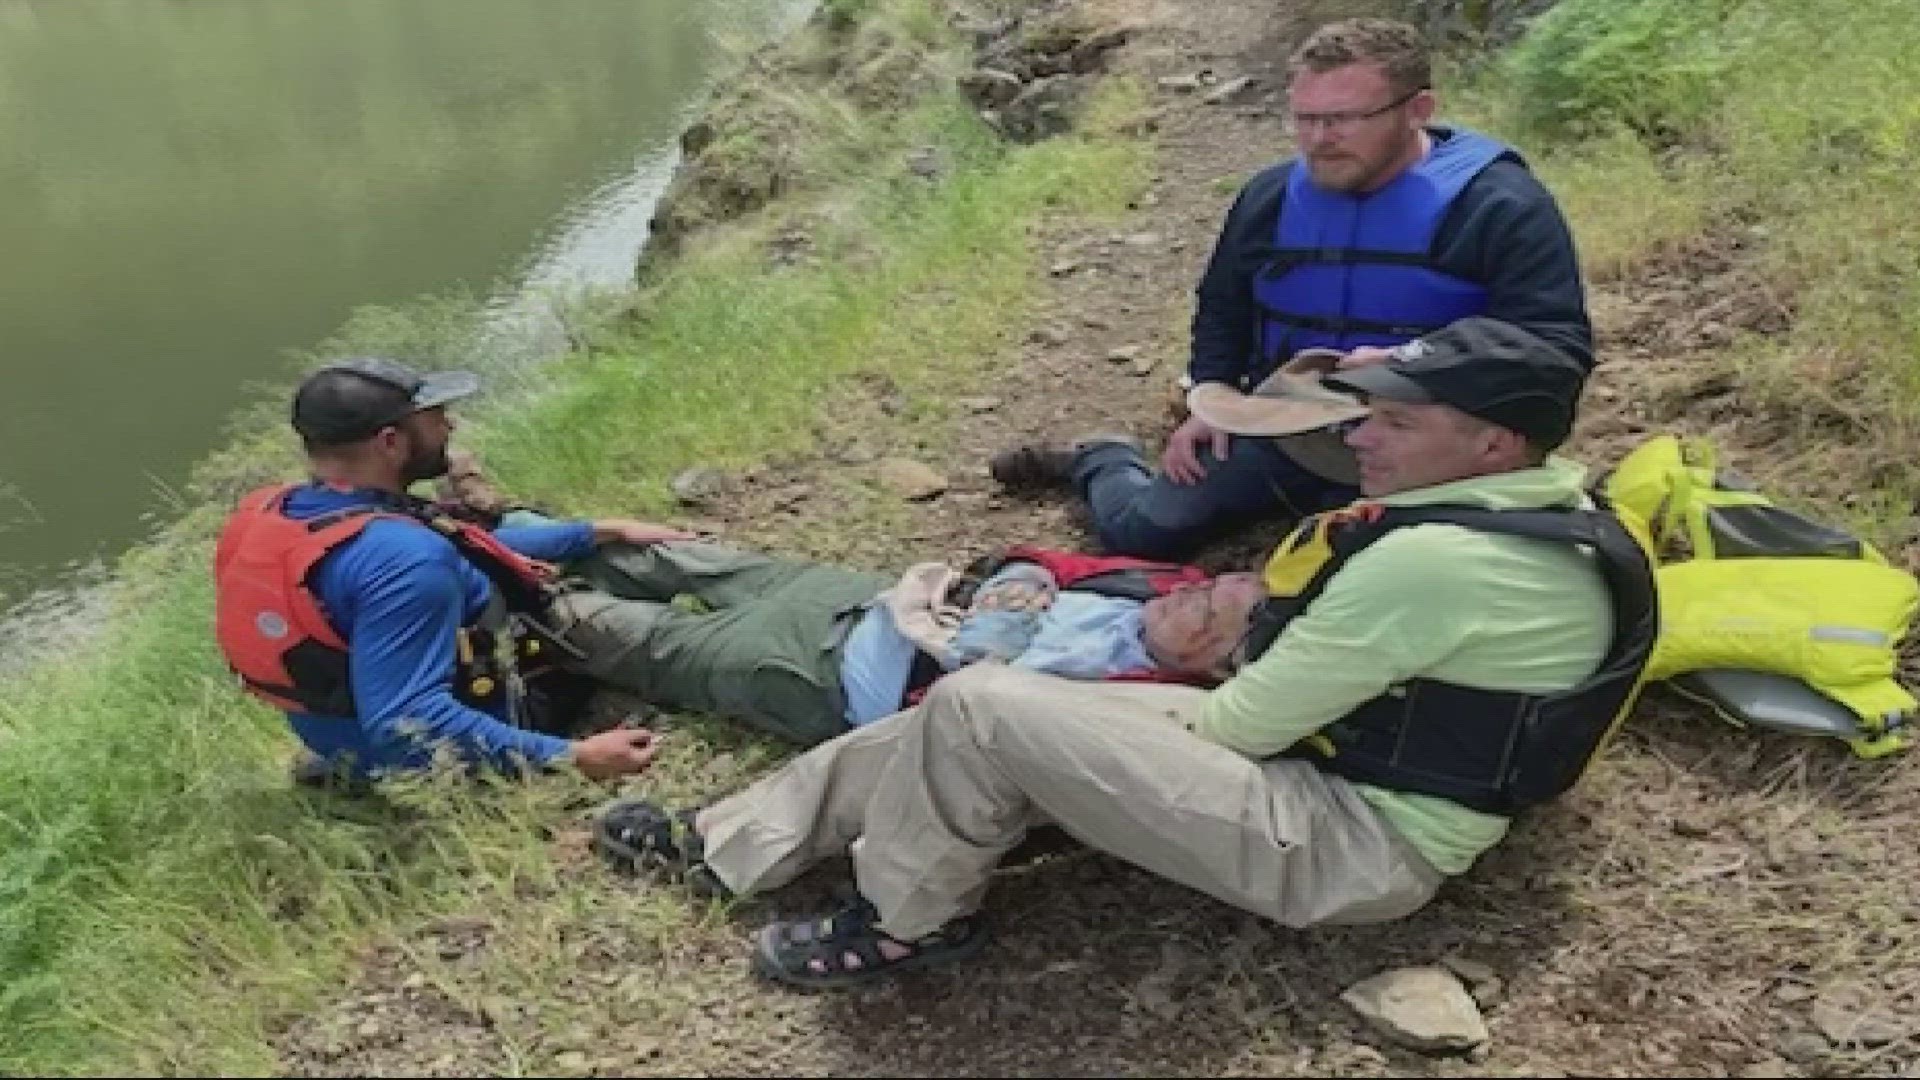 Eric Valentine lost his balance and tumbled down the side of Hells Canyon. A boy scout troop canoeing in the river below was flagged down to help.